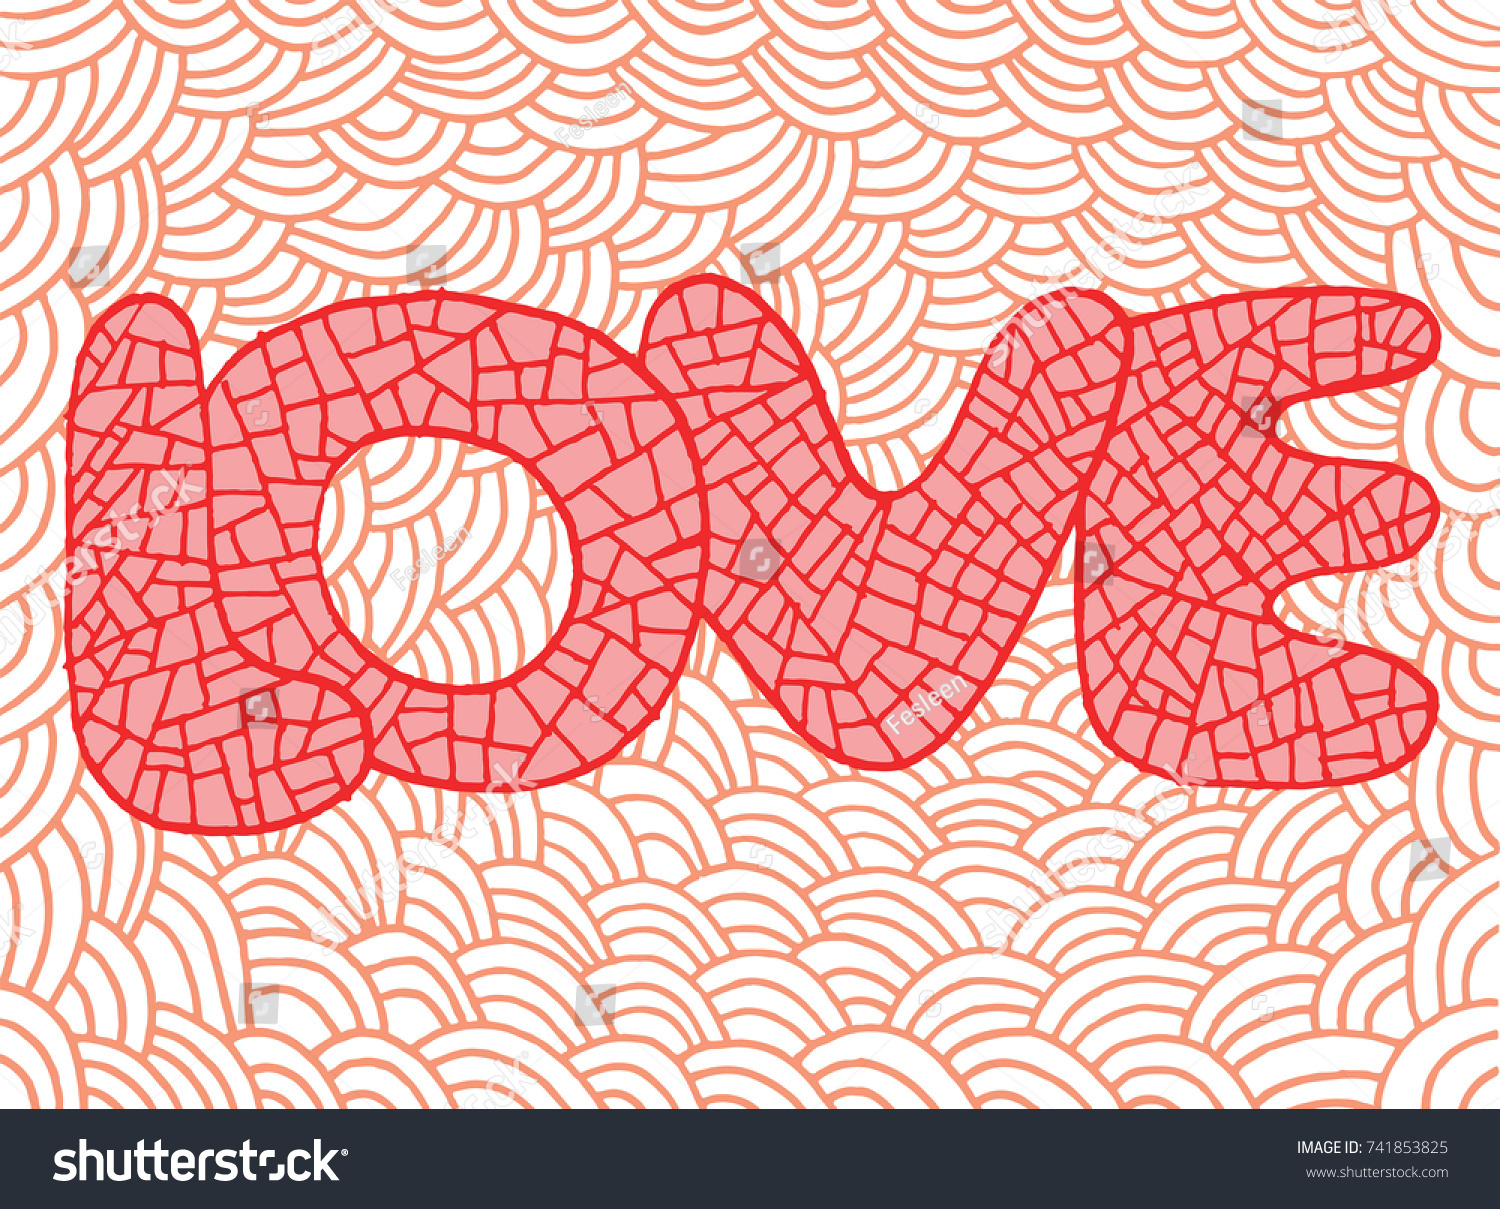 Doodle Art Love Word Hand Drawn Stock Vector Royalty Free